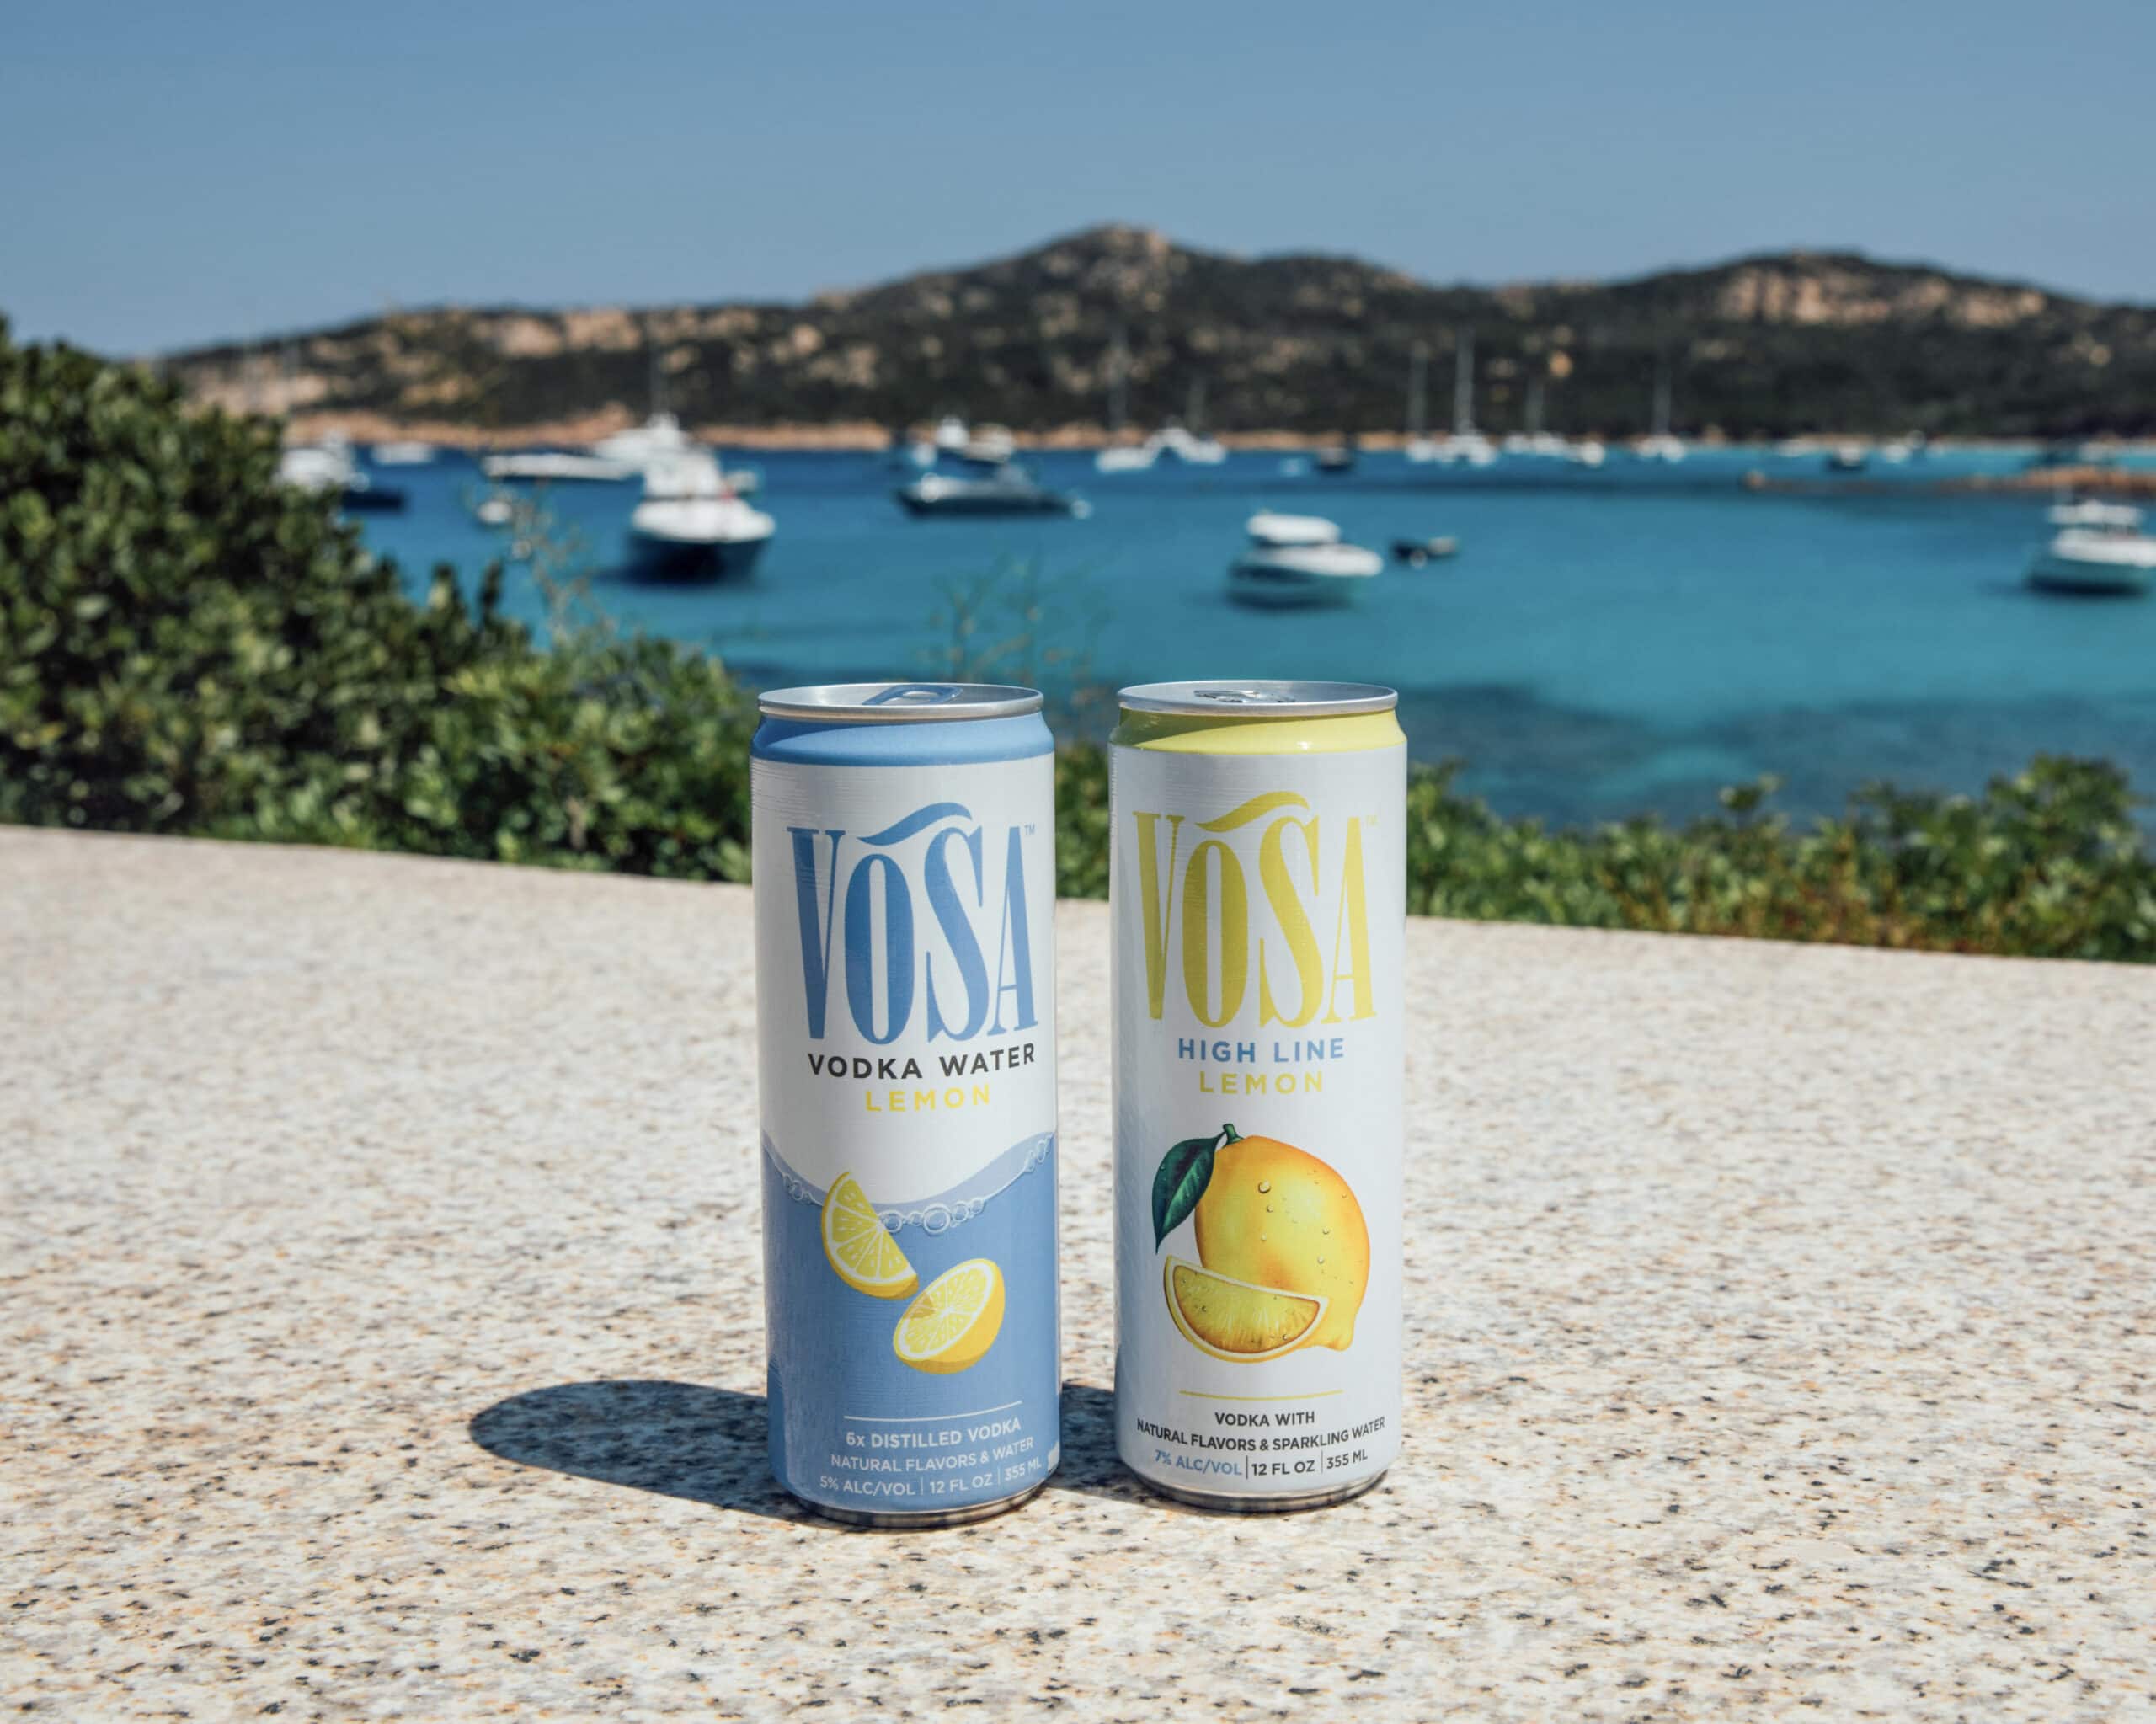 Vosa cans